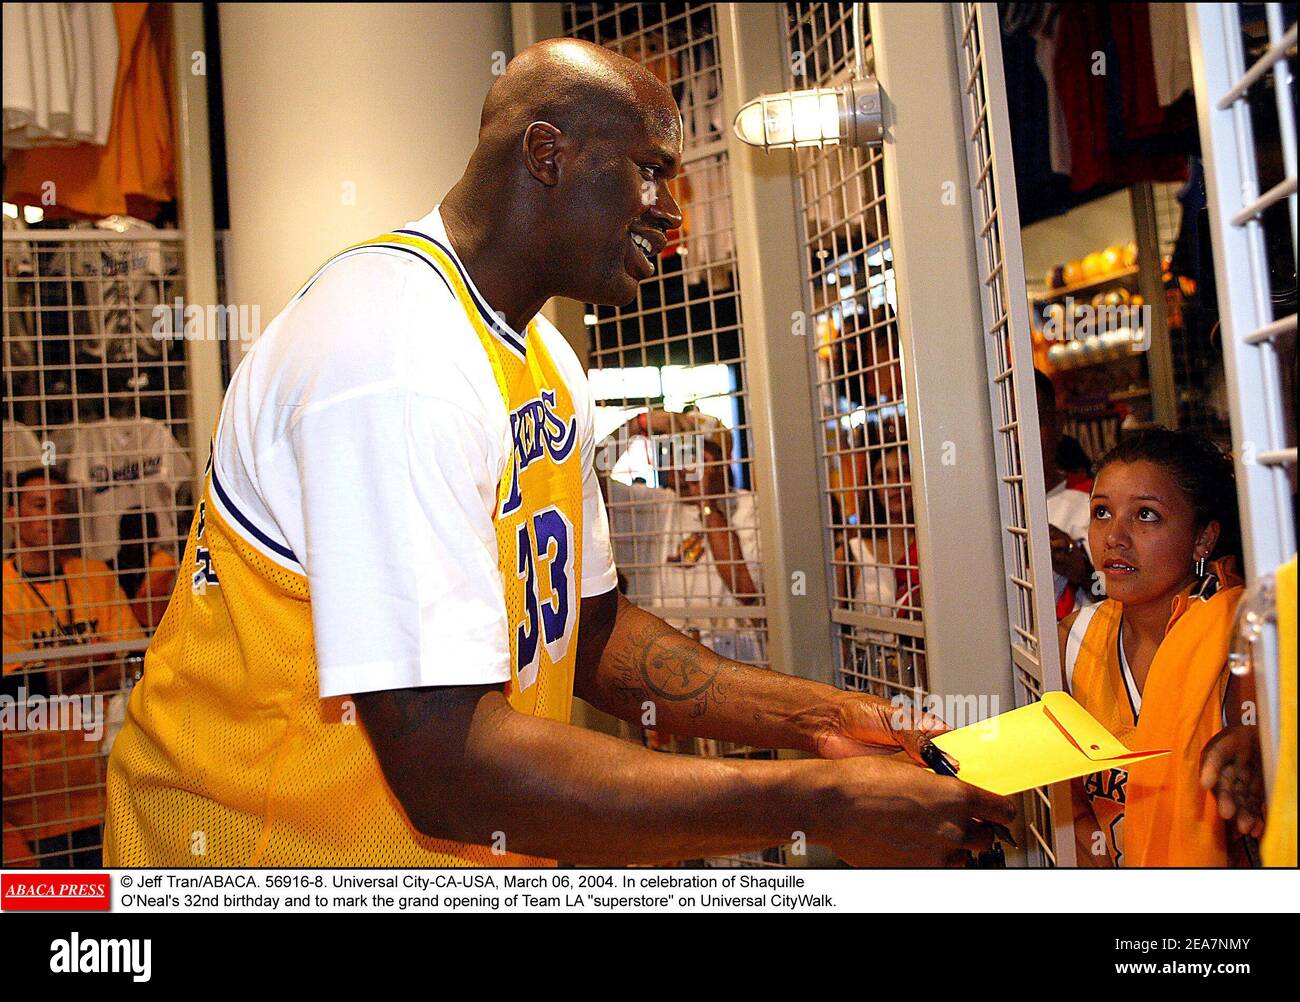 © Jeff Tran/ABACA. 56916-8. Universal City-CA-USA, March 06, 2004. In celebration of Shaquille O'Neal's 32nd birthday and to mark the grand opening of Team LA superstore on Universal CityWalk, Shaquille unveils a 40 feet tall neon sign in his likeness sporting his famous number 34 Lakers Jersey. However, Shaquille attends the event wearing a Lakers Jersey number 33 which was once worn by a retired Lakers player, Kareem Abdul-Jabar. Stock Photo